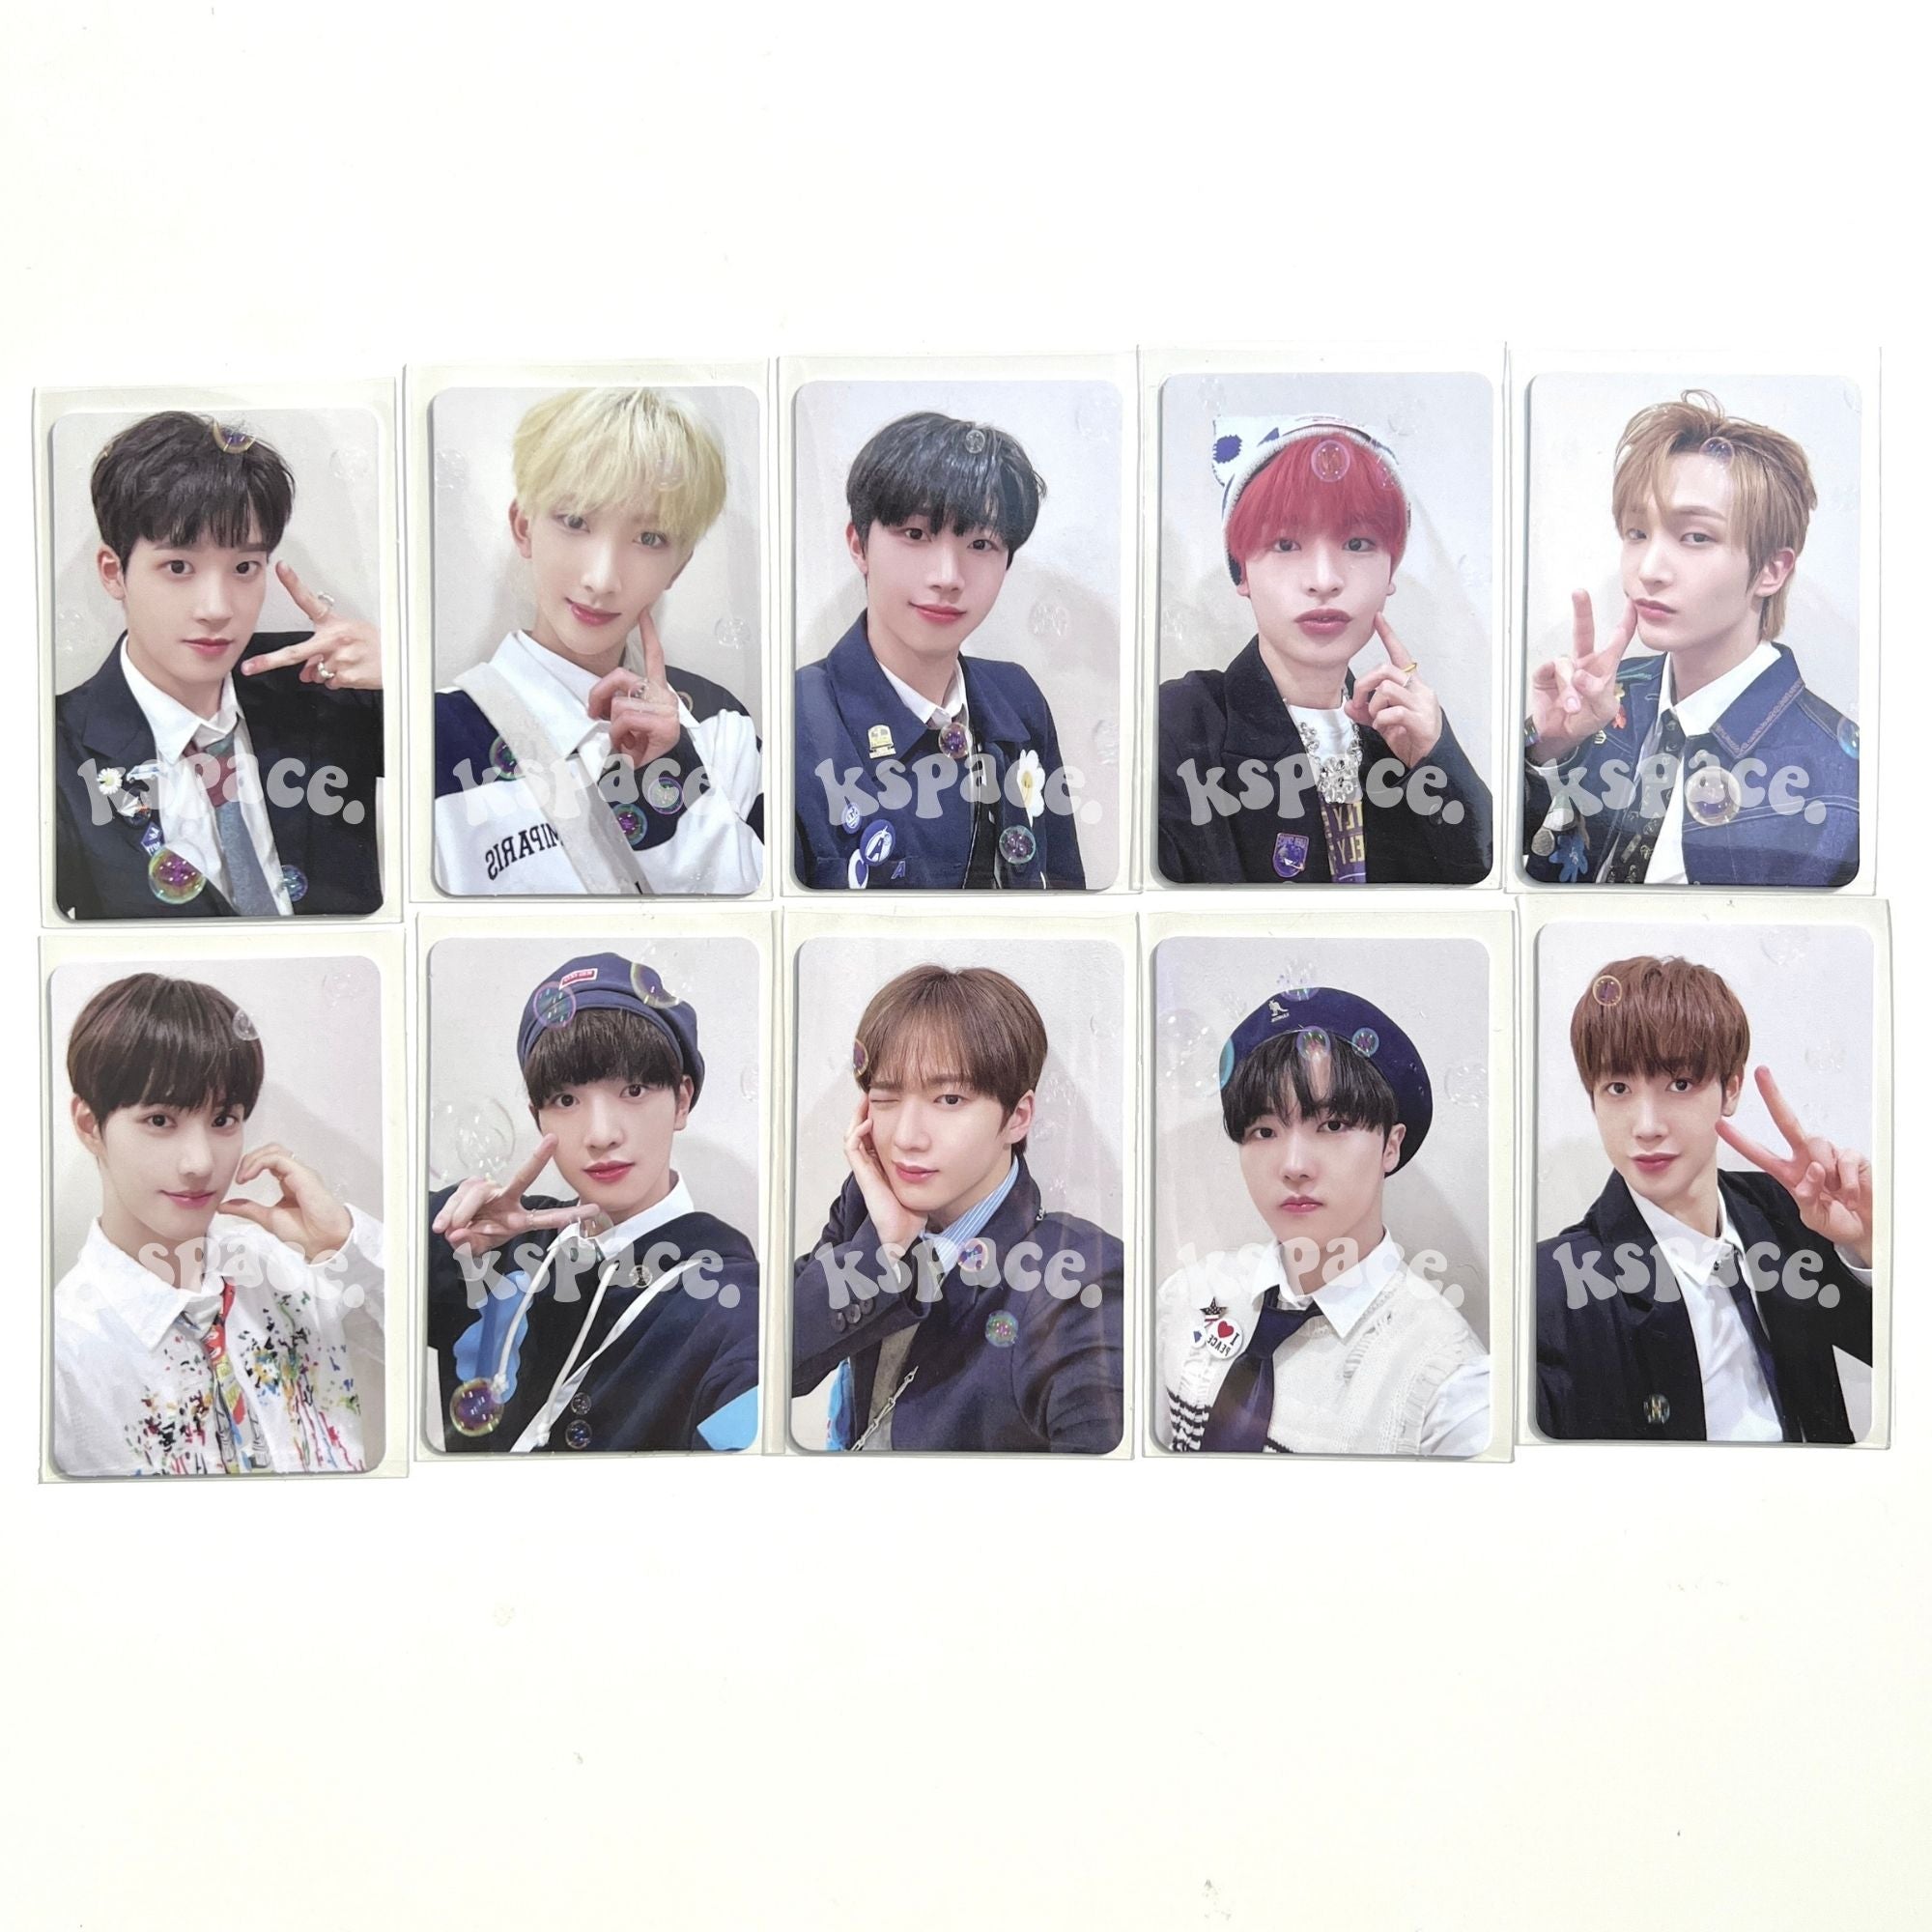 XIKERS - HOUSE OF TRICKY : DOORBELL RINGING OFFICIAL PREORDER BENEFIT PHOTOCARDS ✅